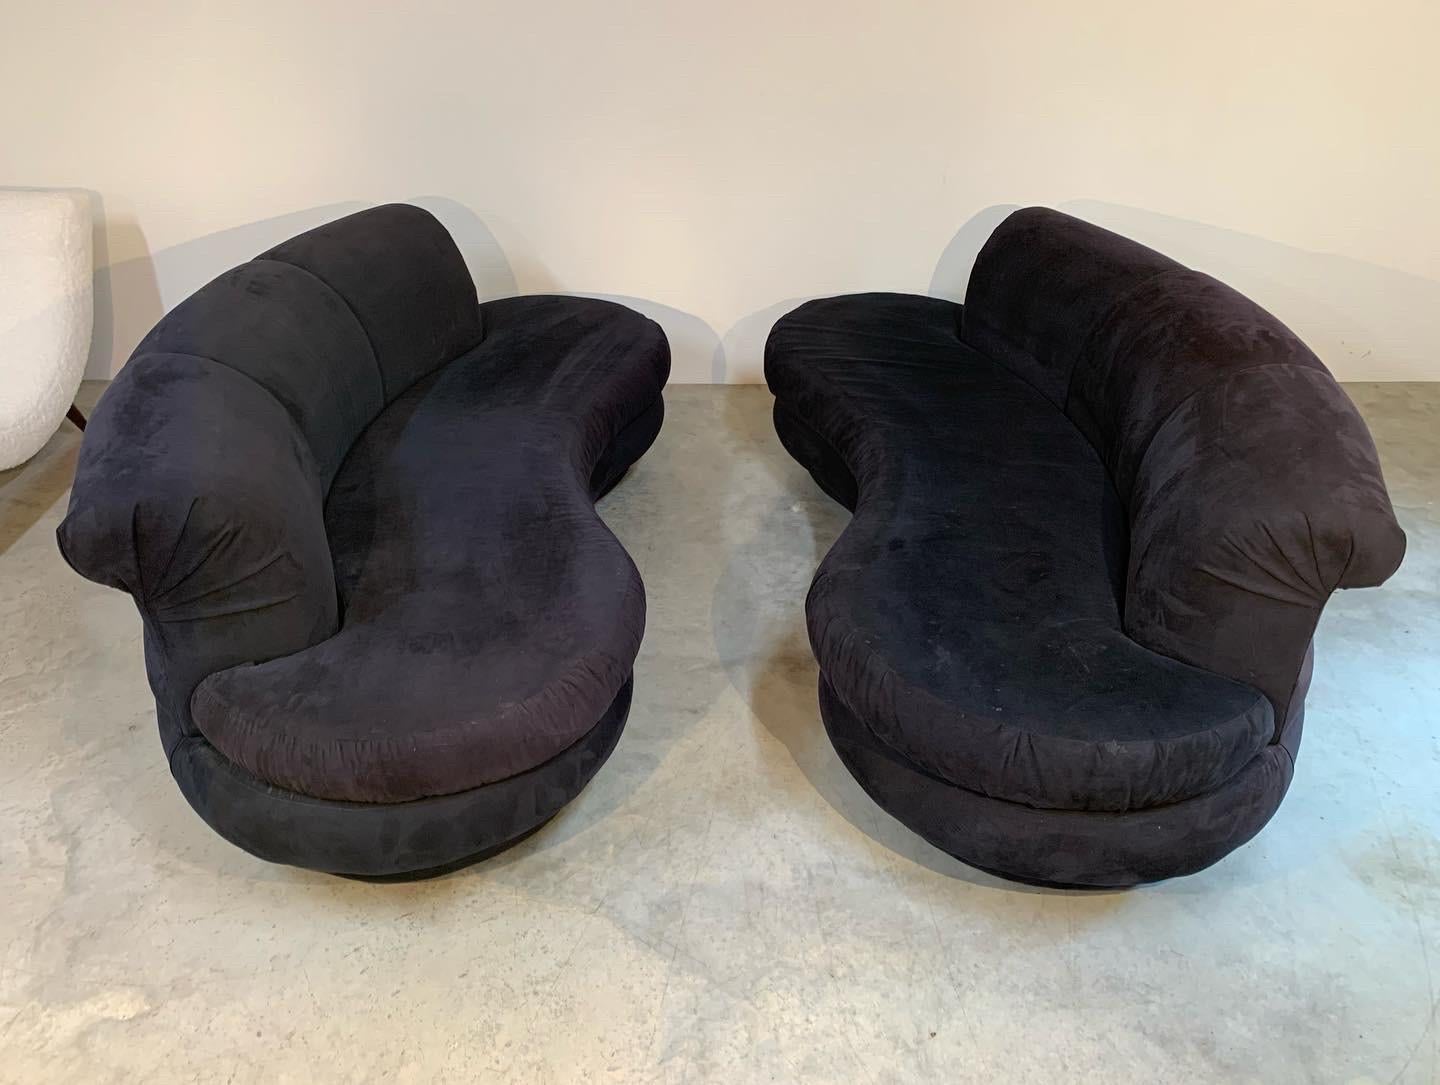 American Matched Pair of Curved Kidney Sofas Attributed to Kagan For Directional 